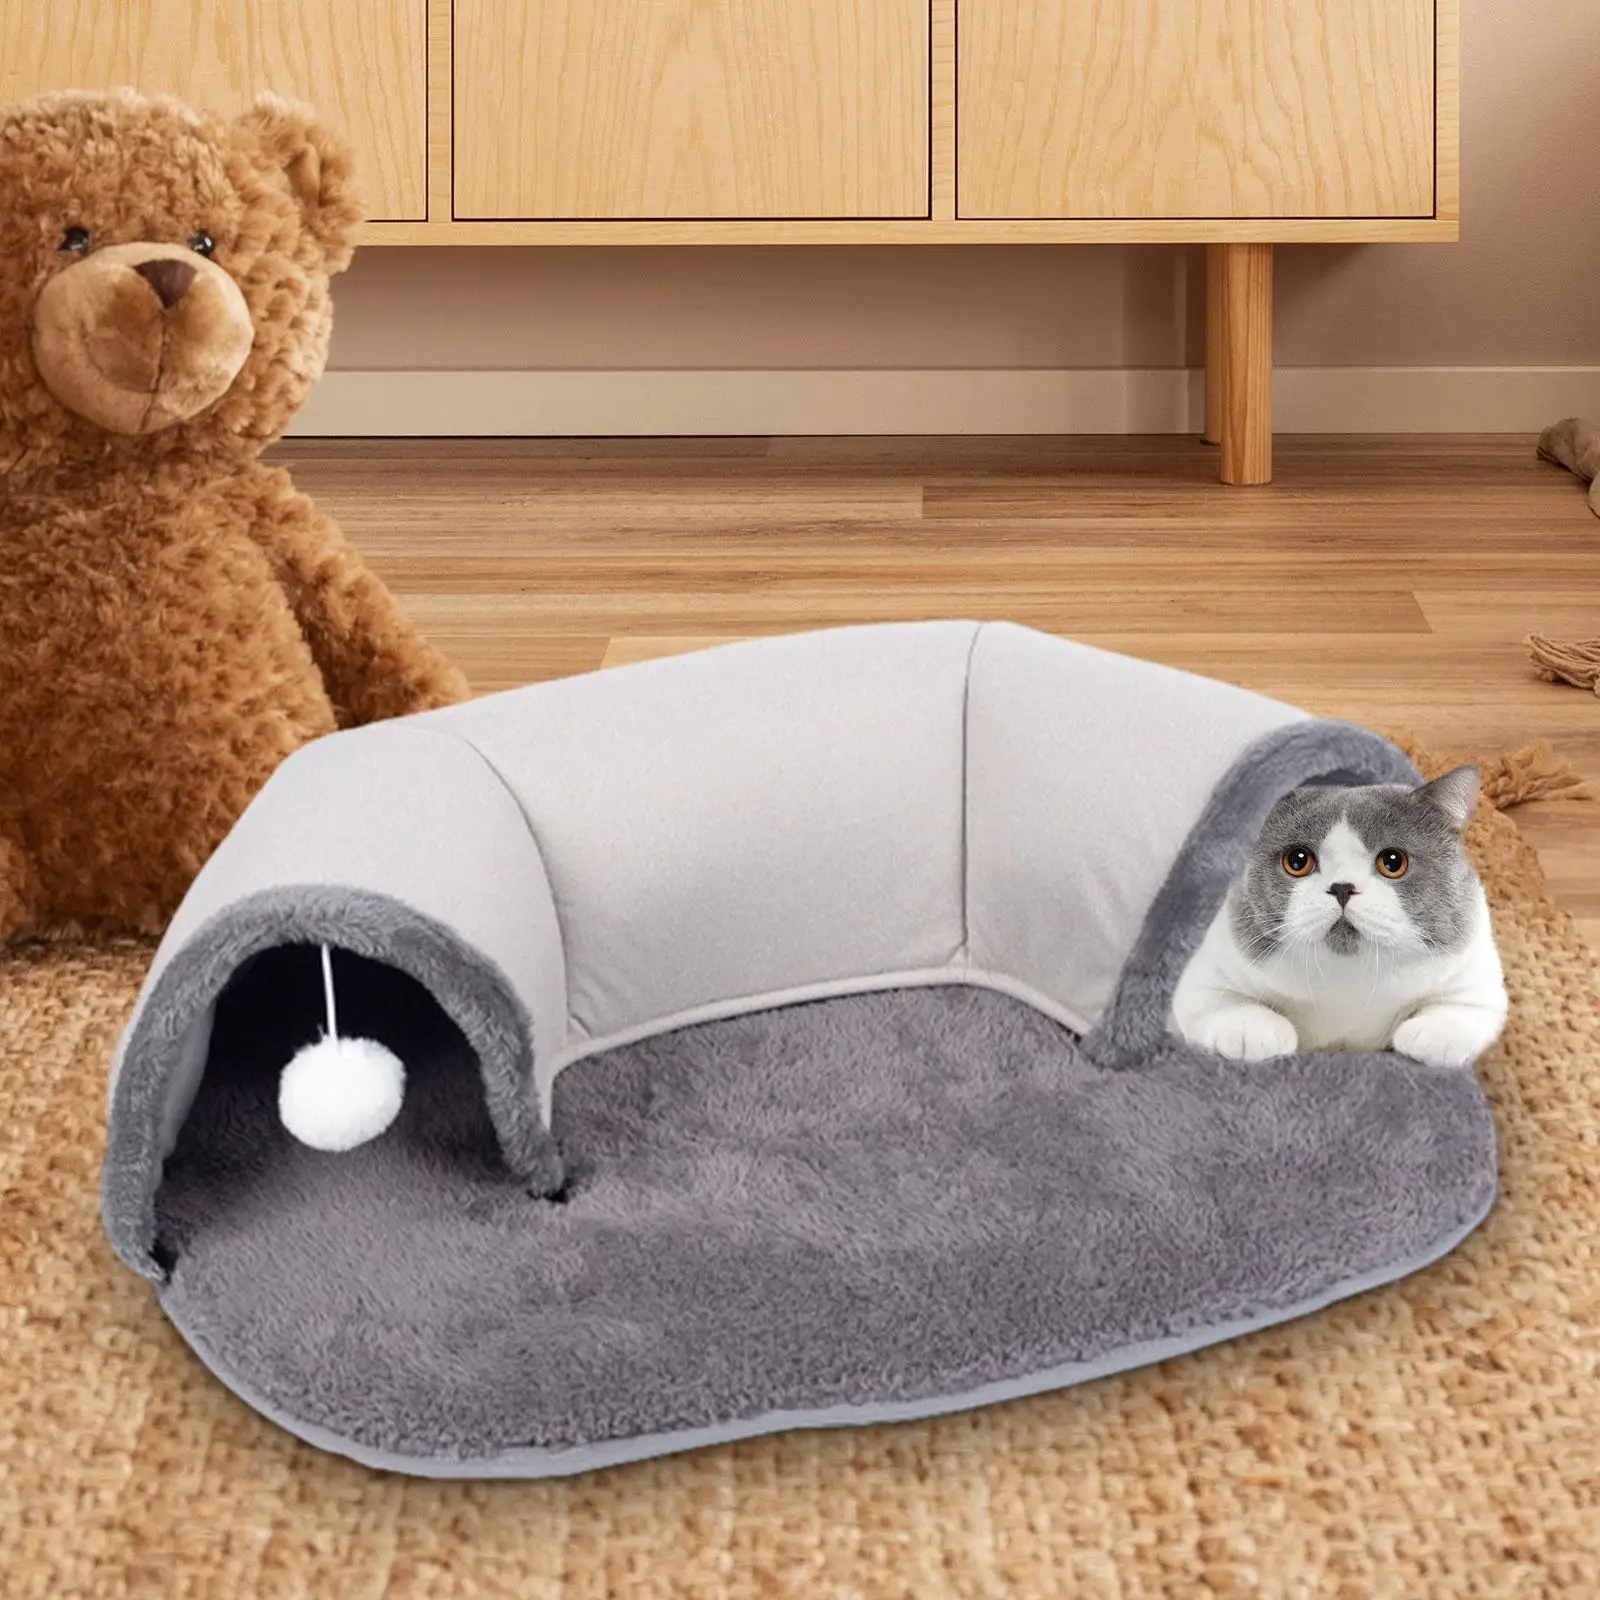 Cat Tunnel and Bed Toy with Toy Ball Soft Anti Slip Bottom Plush Mats Multifunctional Pets Nest Cat House Fun Playing Exercise